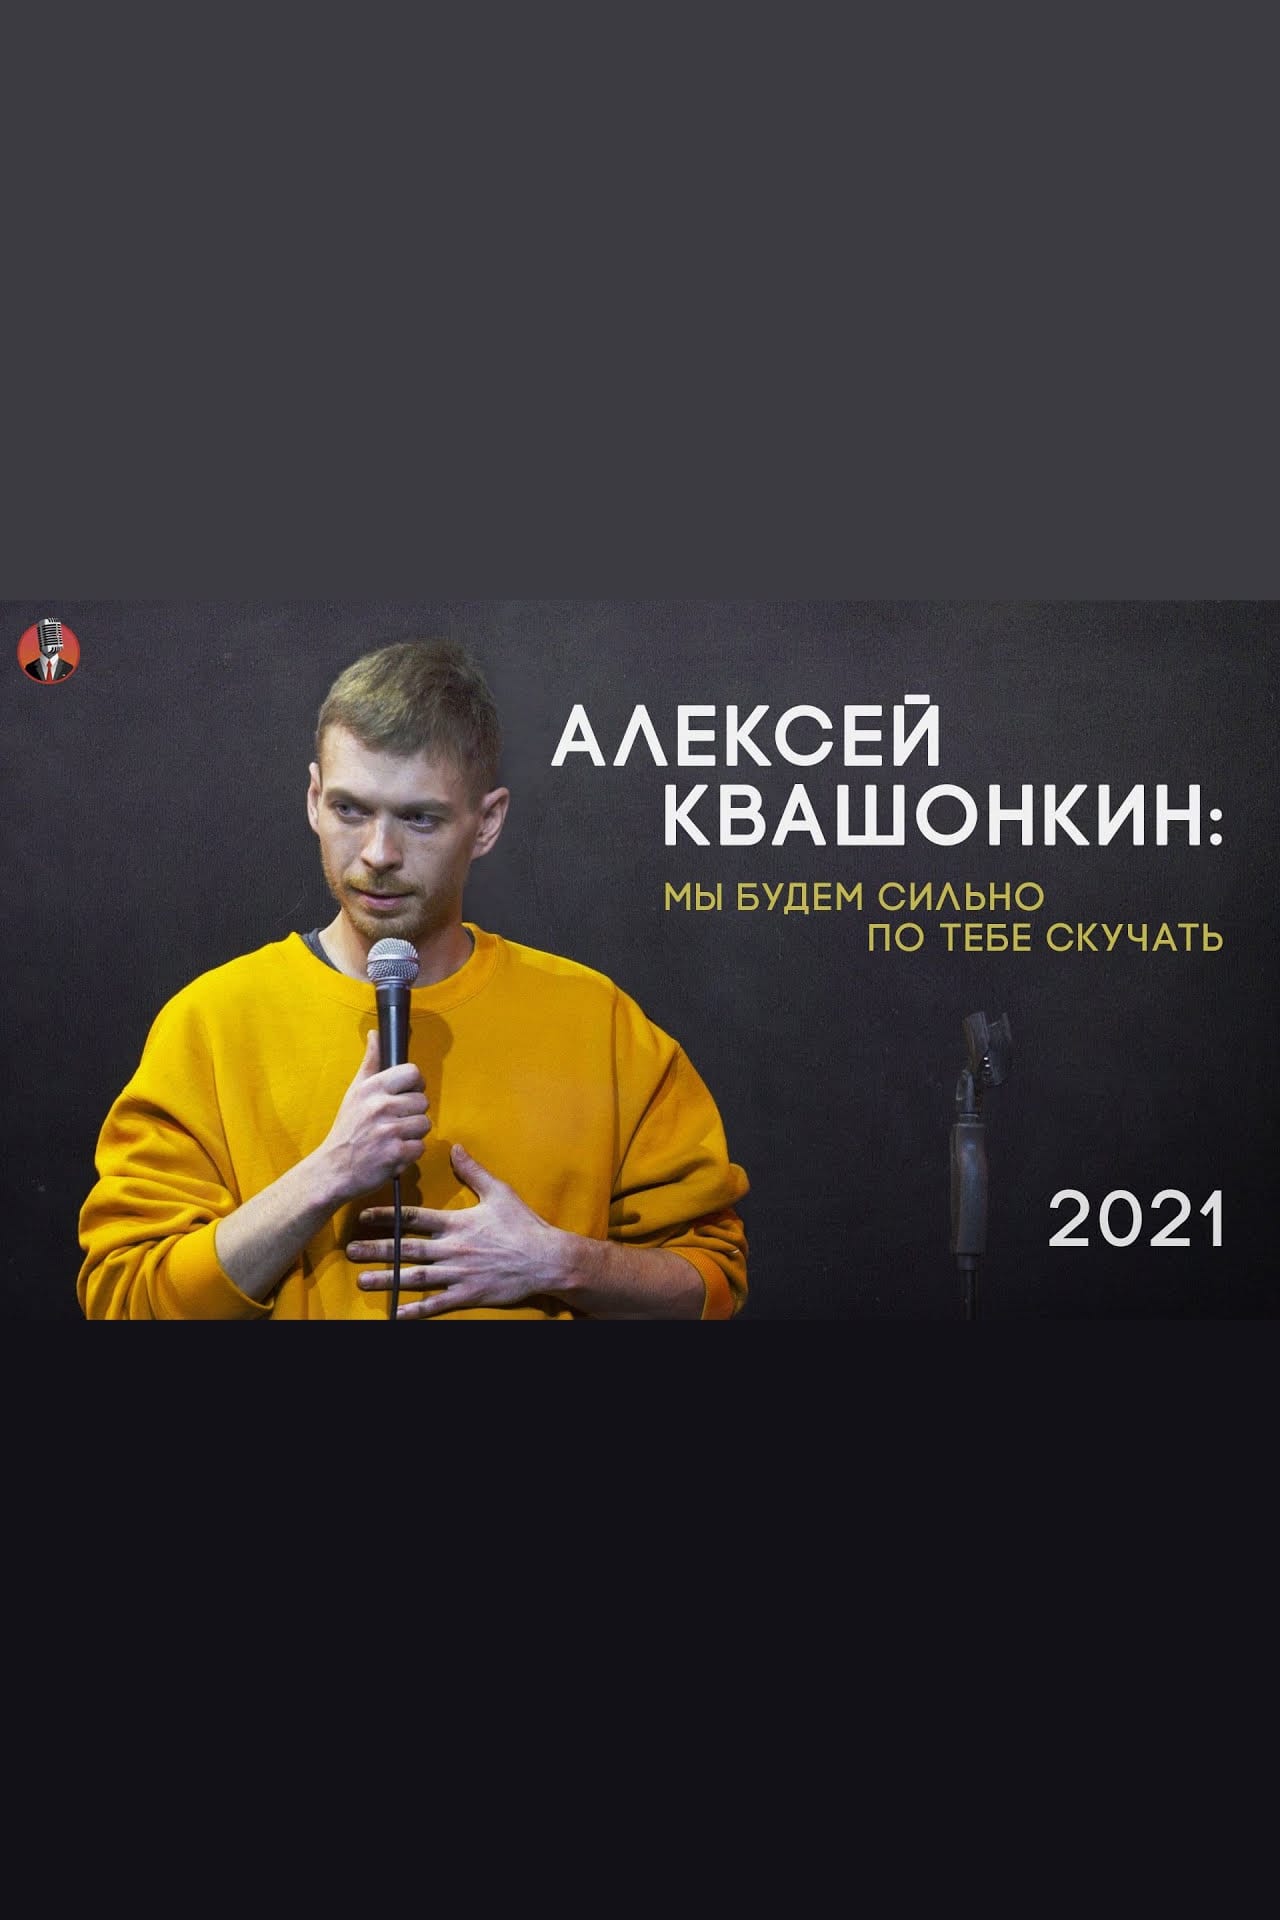 Alexey Kvashonkin: We Will Miss You Very Much